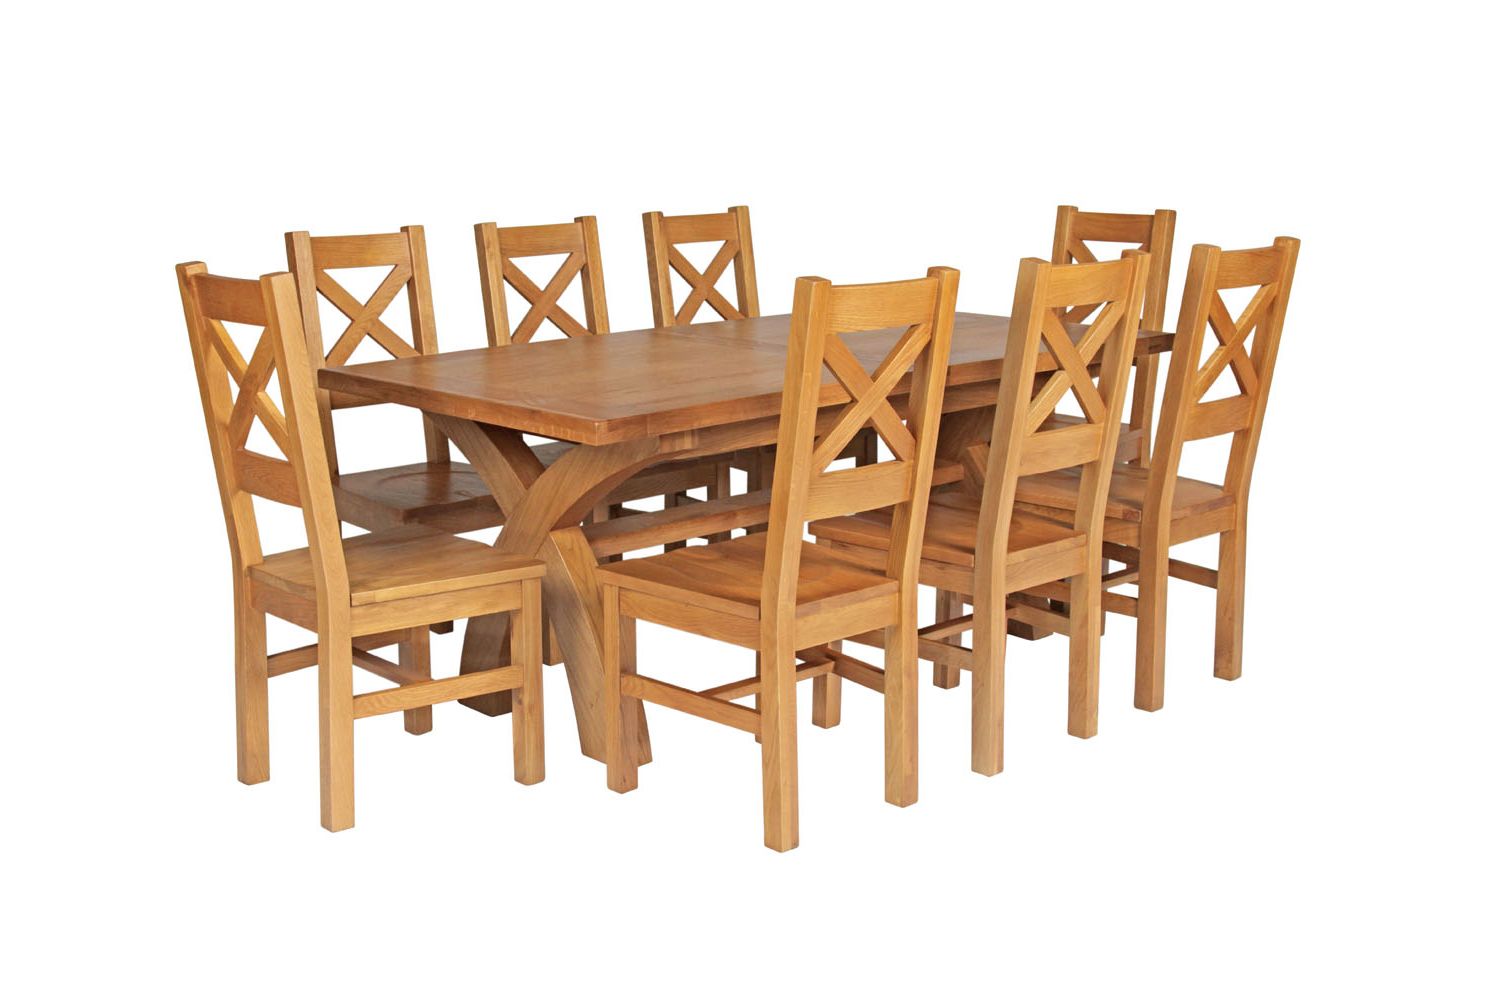 Trendy Armless Square Dining Sets Regarding Square Table With 8 Chairs / Square Design 8 Chairs Dining Table Set (View 6 of 15)